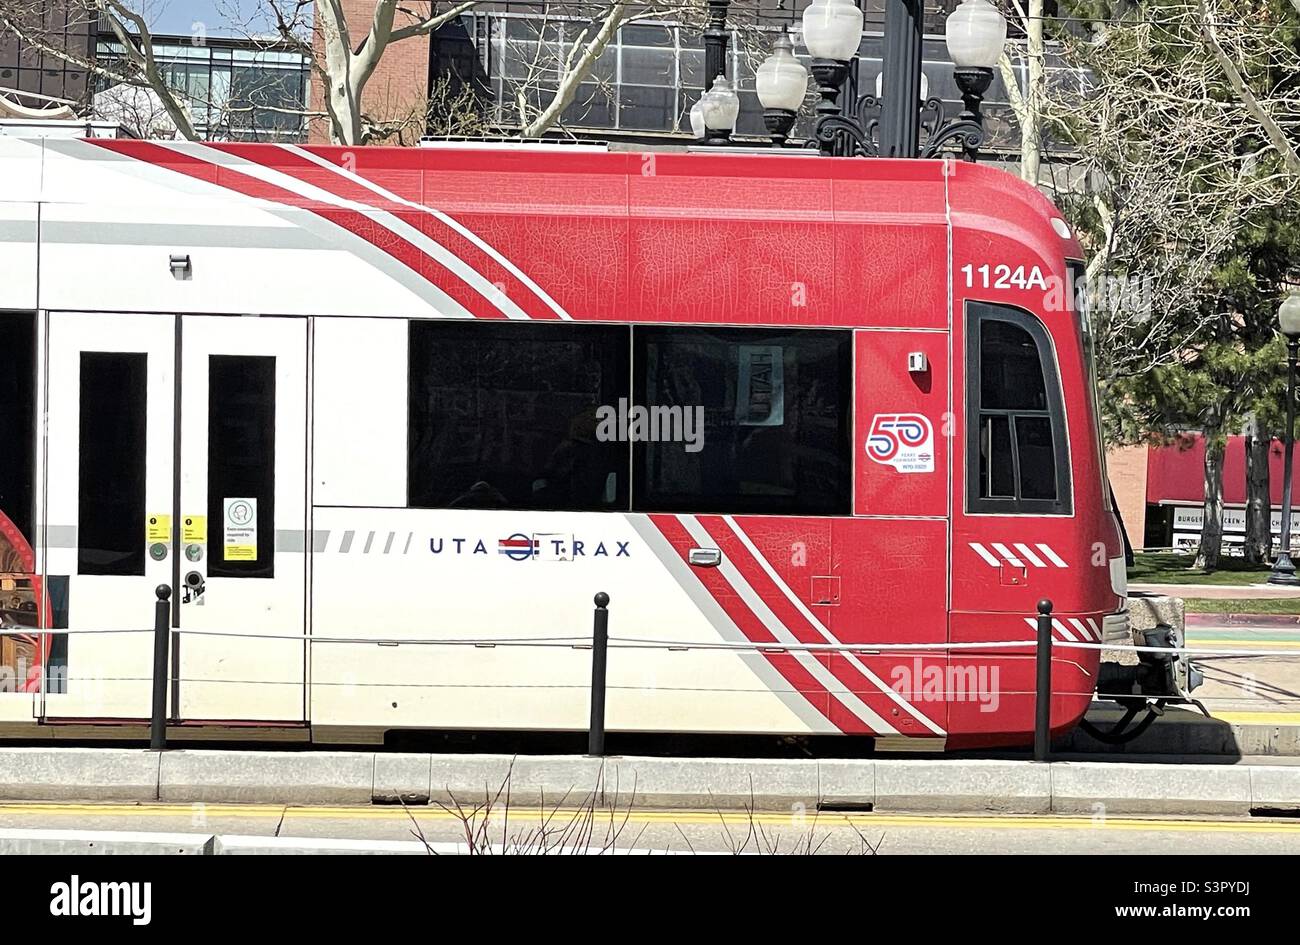 UTA (Utah.Transit Authority) TRAX train traveling up South Temple in Salt Lake City, Utah, USA between the Triad Center (a local media hub) and the Vivint Arena (home of the NBA team, the Utah Jazz). Stock Photo